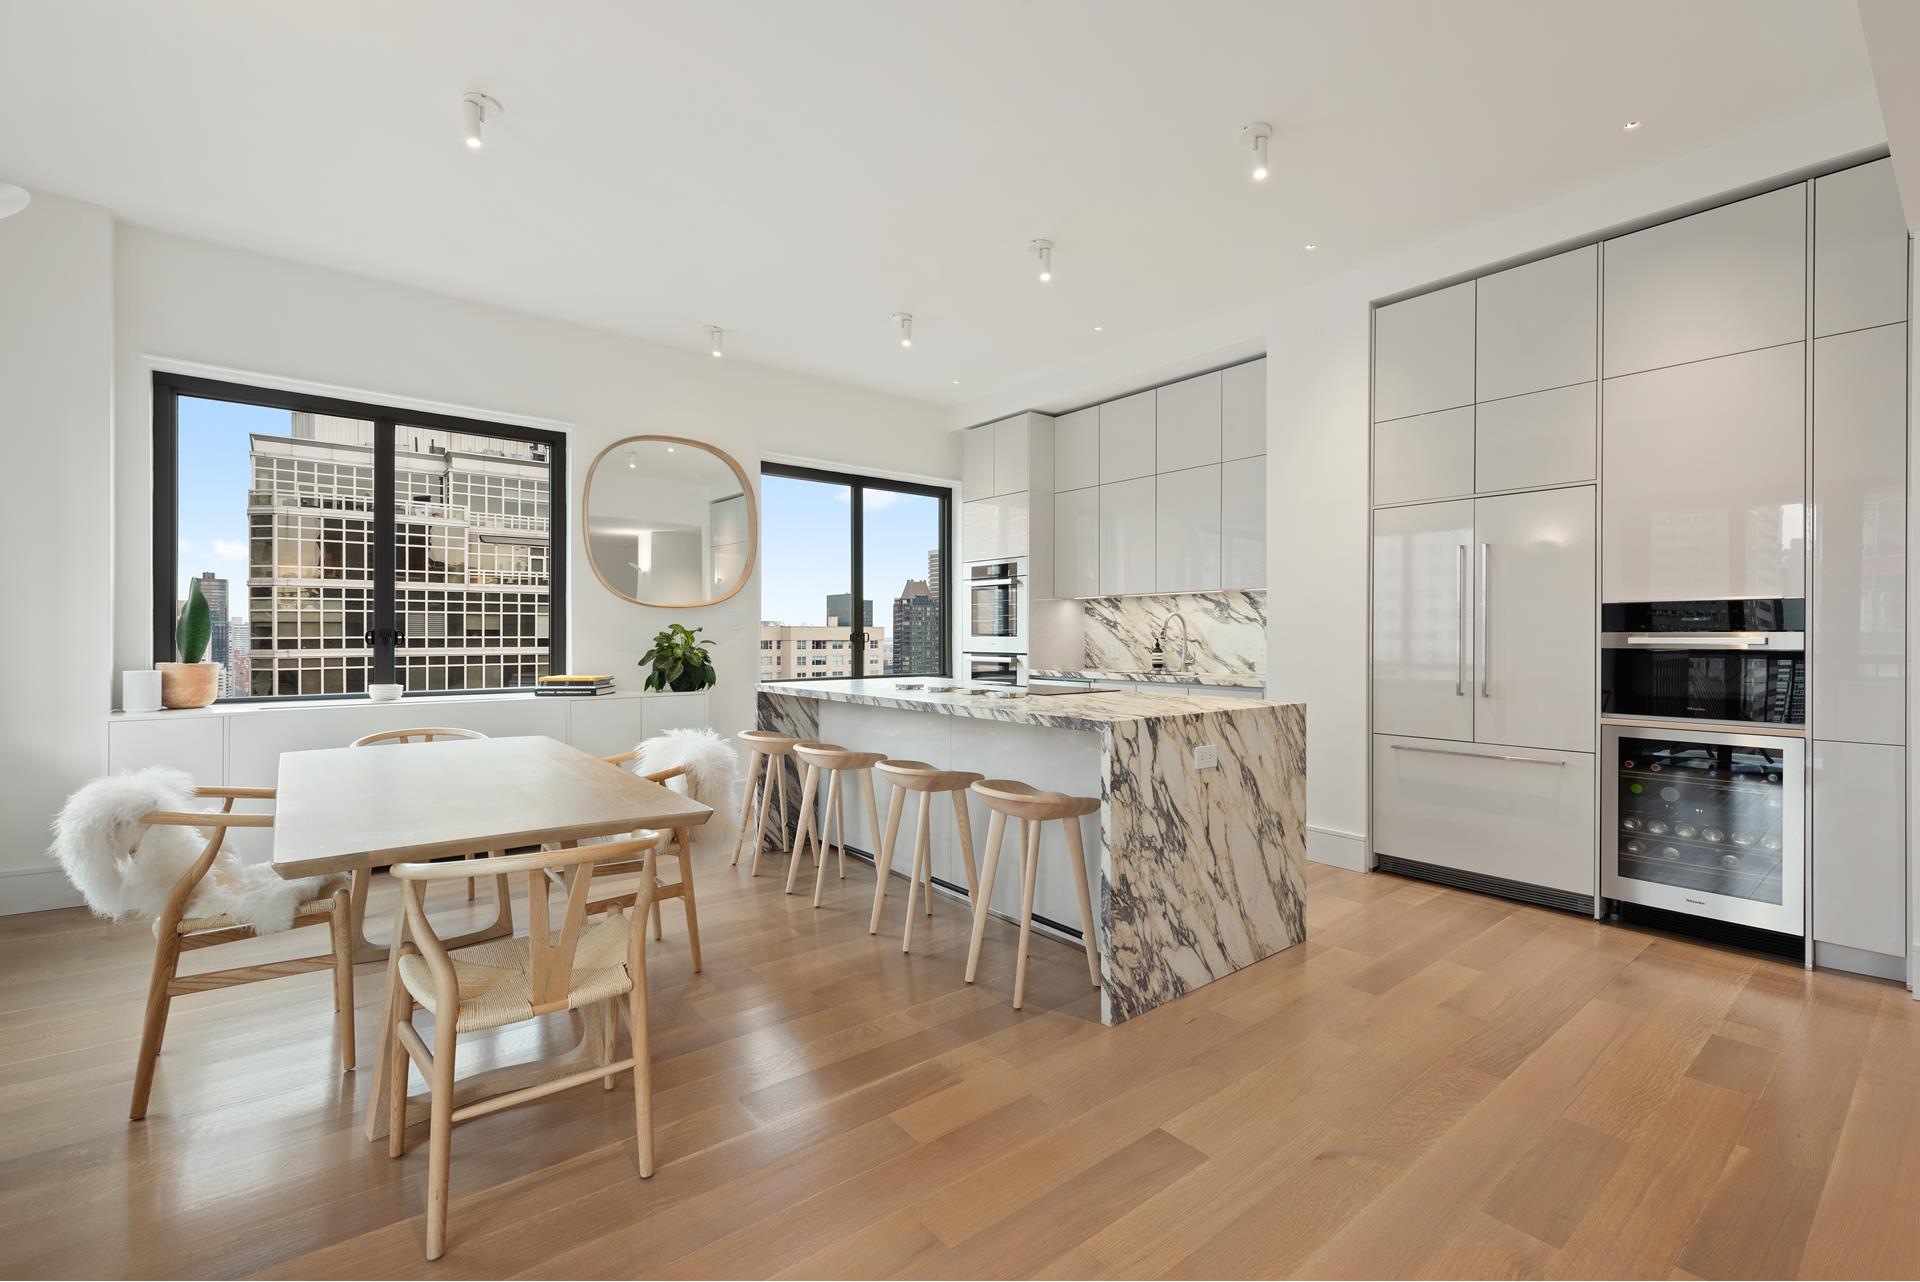 300 East 54th Street Phgh, Sutton, Midtown East, NYC - 2 Bedrooms  
3 Bathrooms  
5 Rooms - 